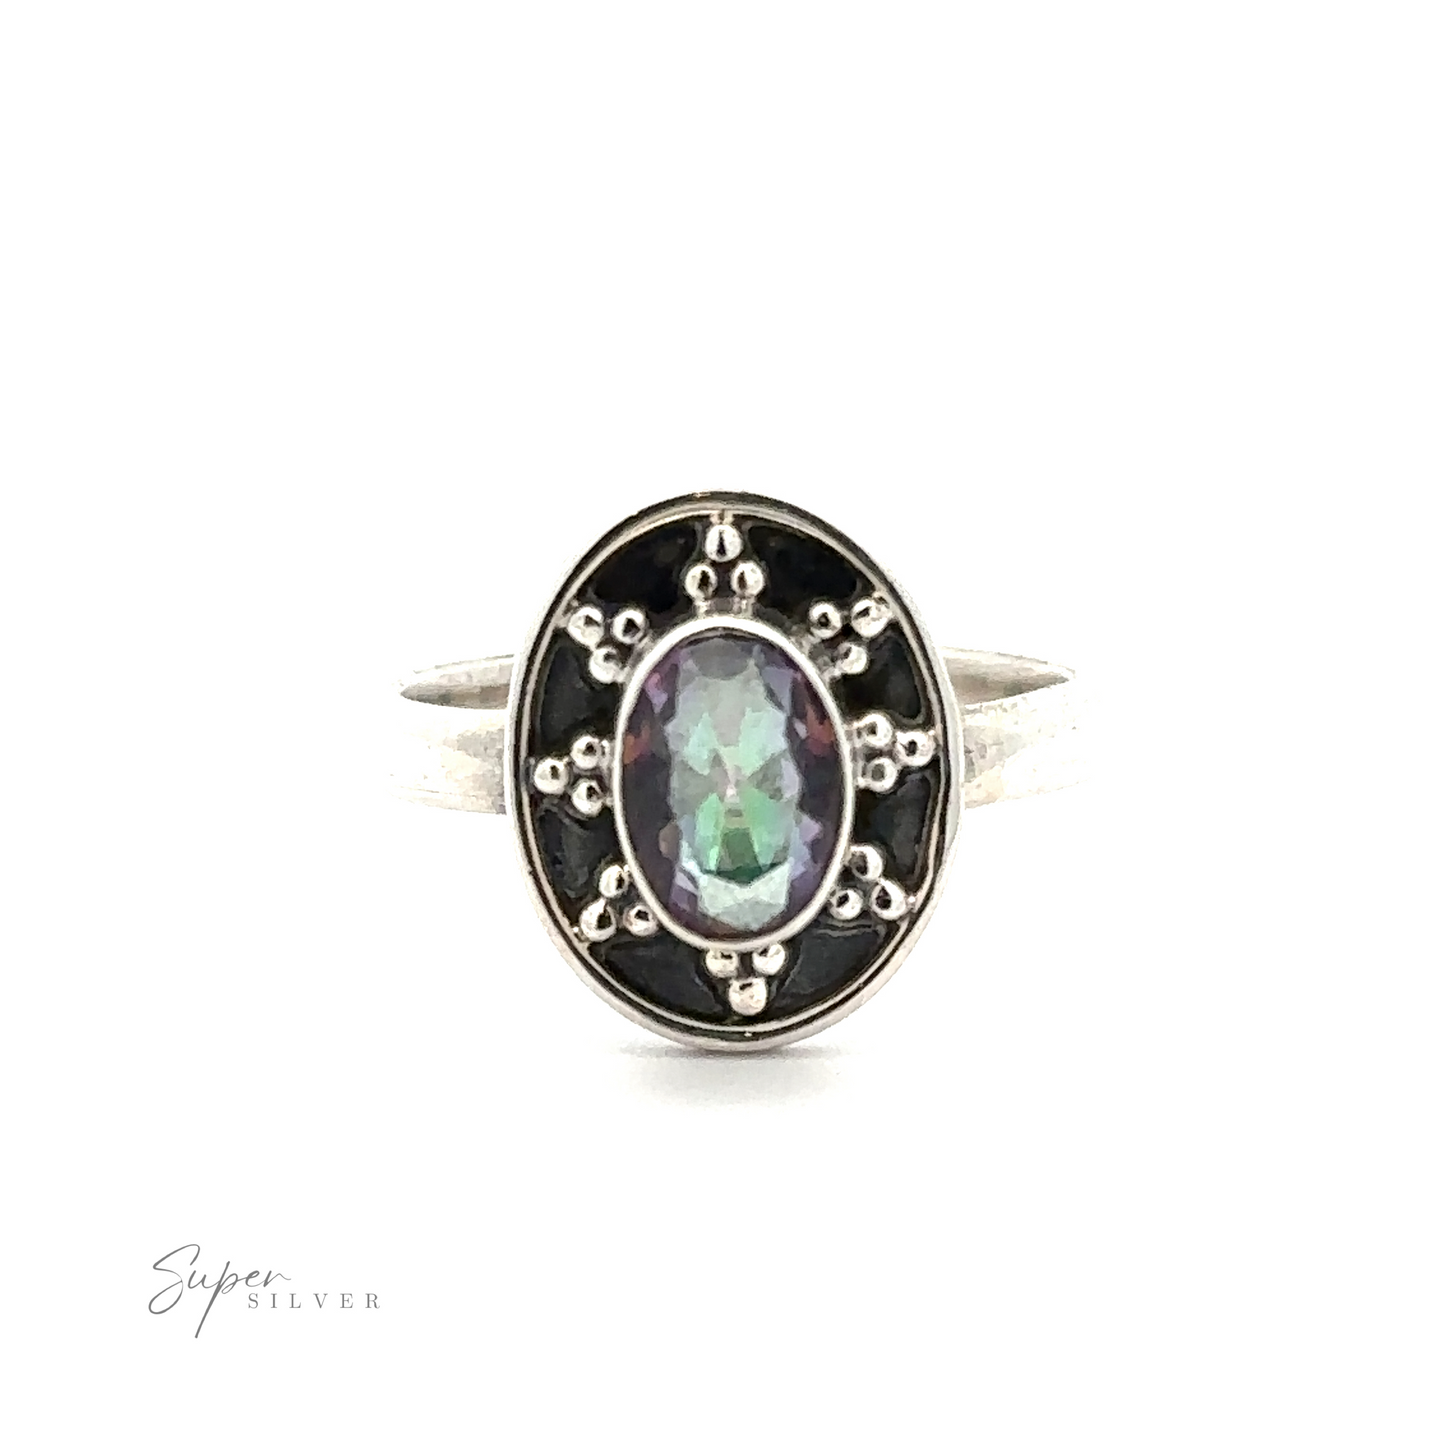 
                  
                    Oval Gemstone Ring with Ball and Disk Border: Silver ring with an oval multi-colored gemstone in the center, surrounded by small round silver accents on a black background. The plain sterling silver band adds a touch of elegance. The brand "Super Silver" is visible on the left, adding to its vintage-inspired jewelry appeal.
                  
                